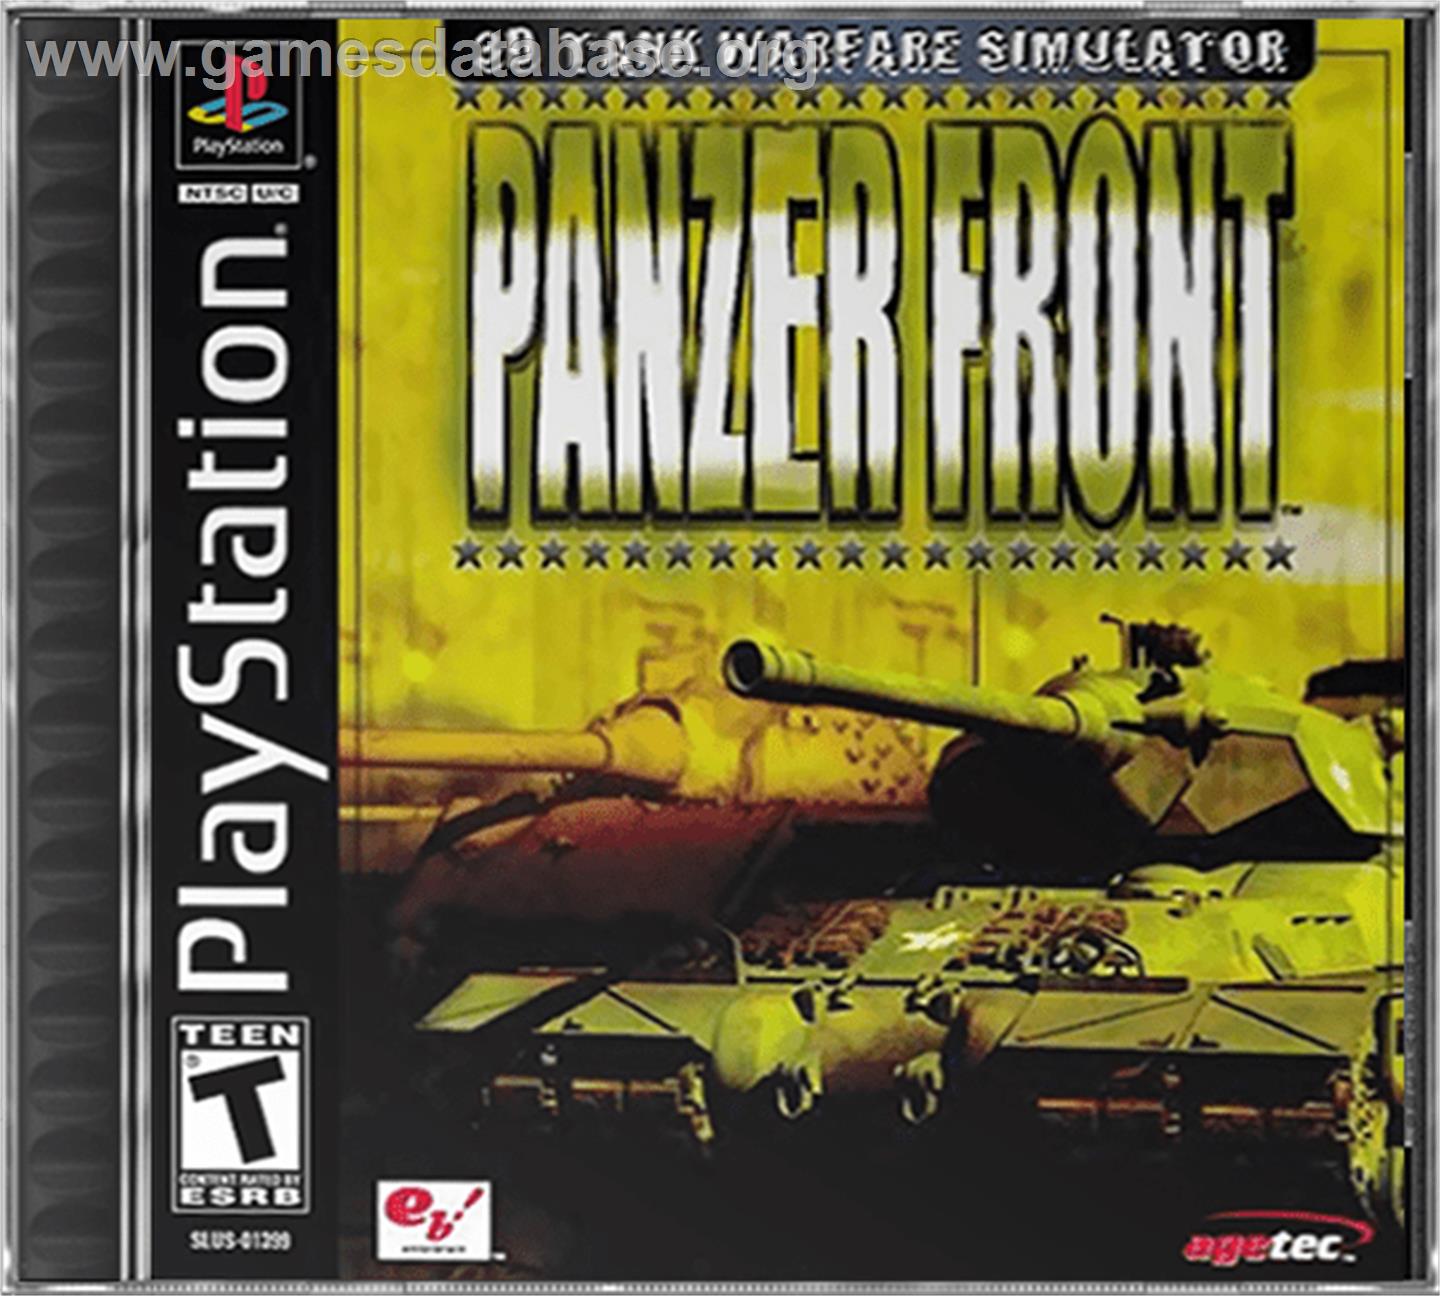 Panzer Front - Sony Playstation - Artwork - Box